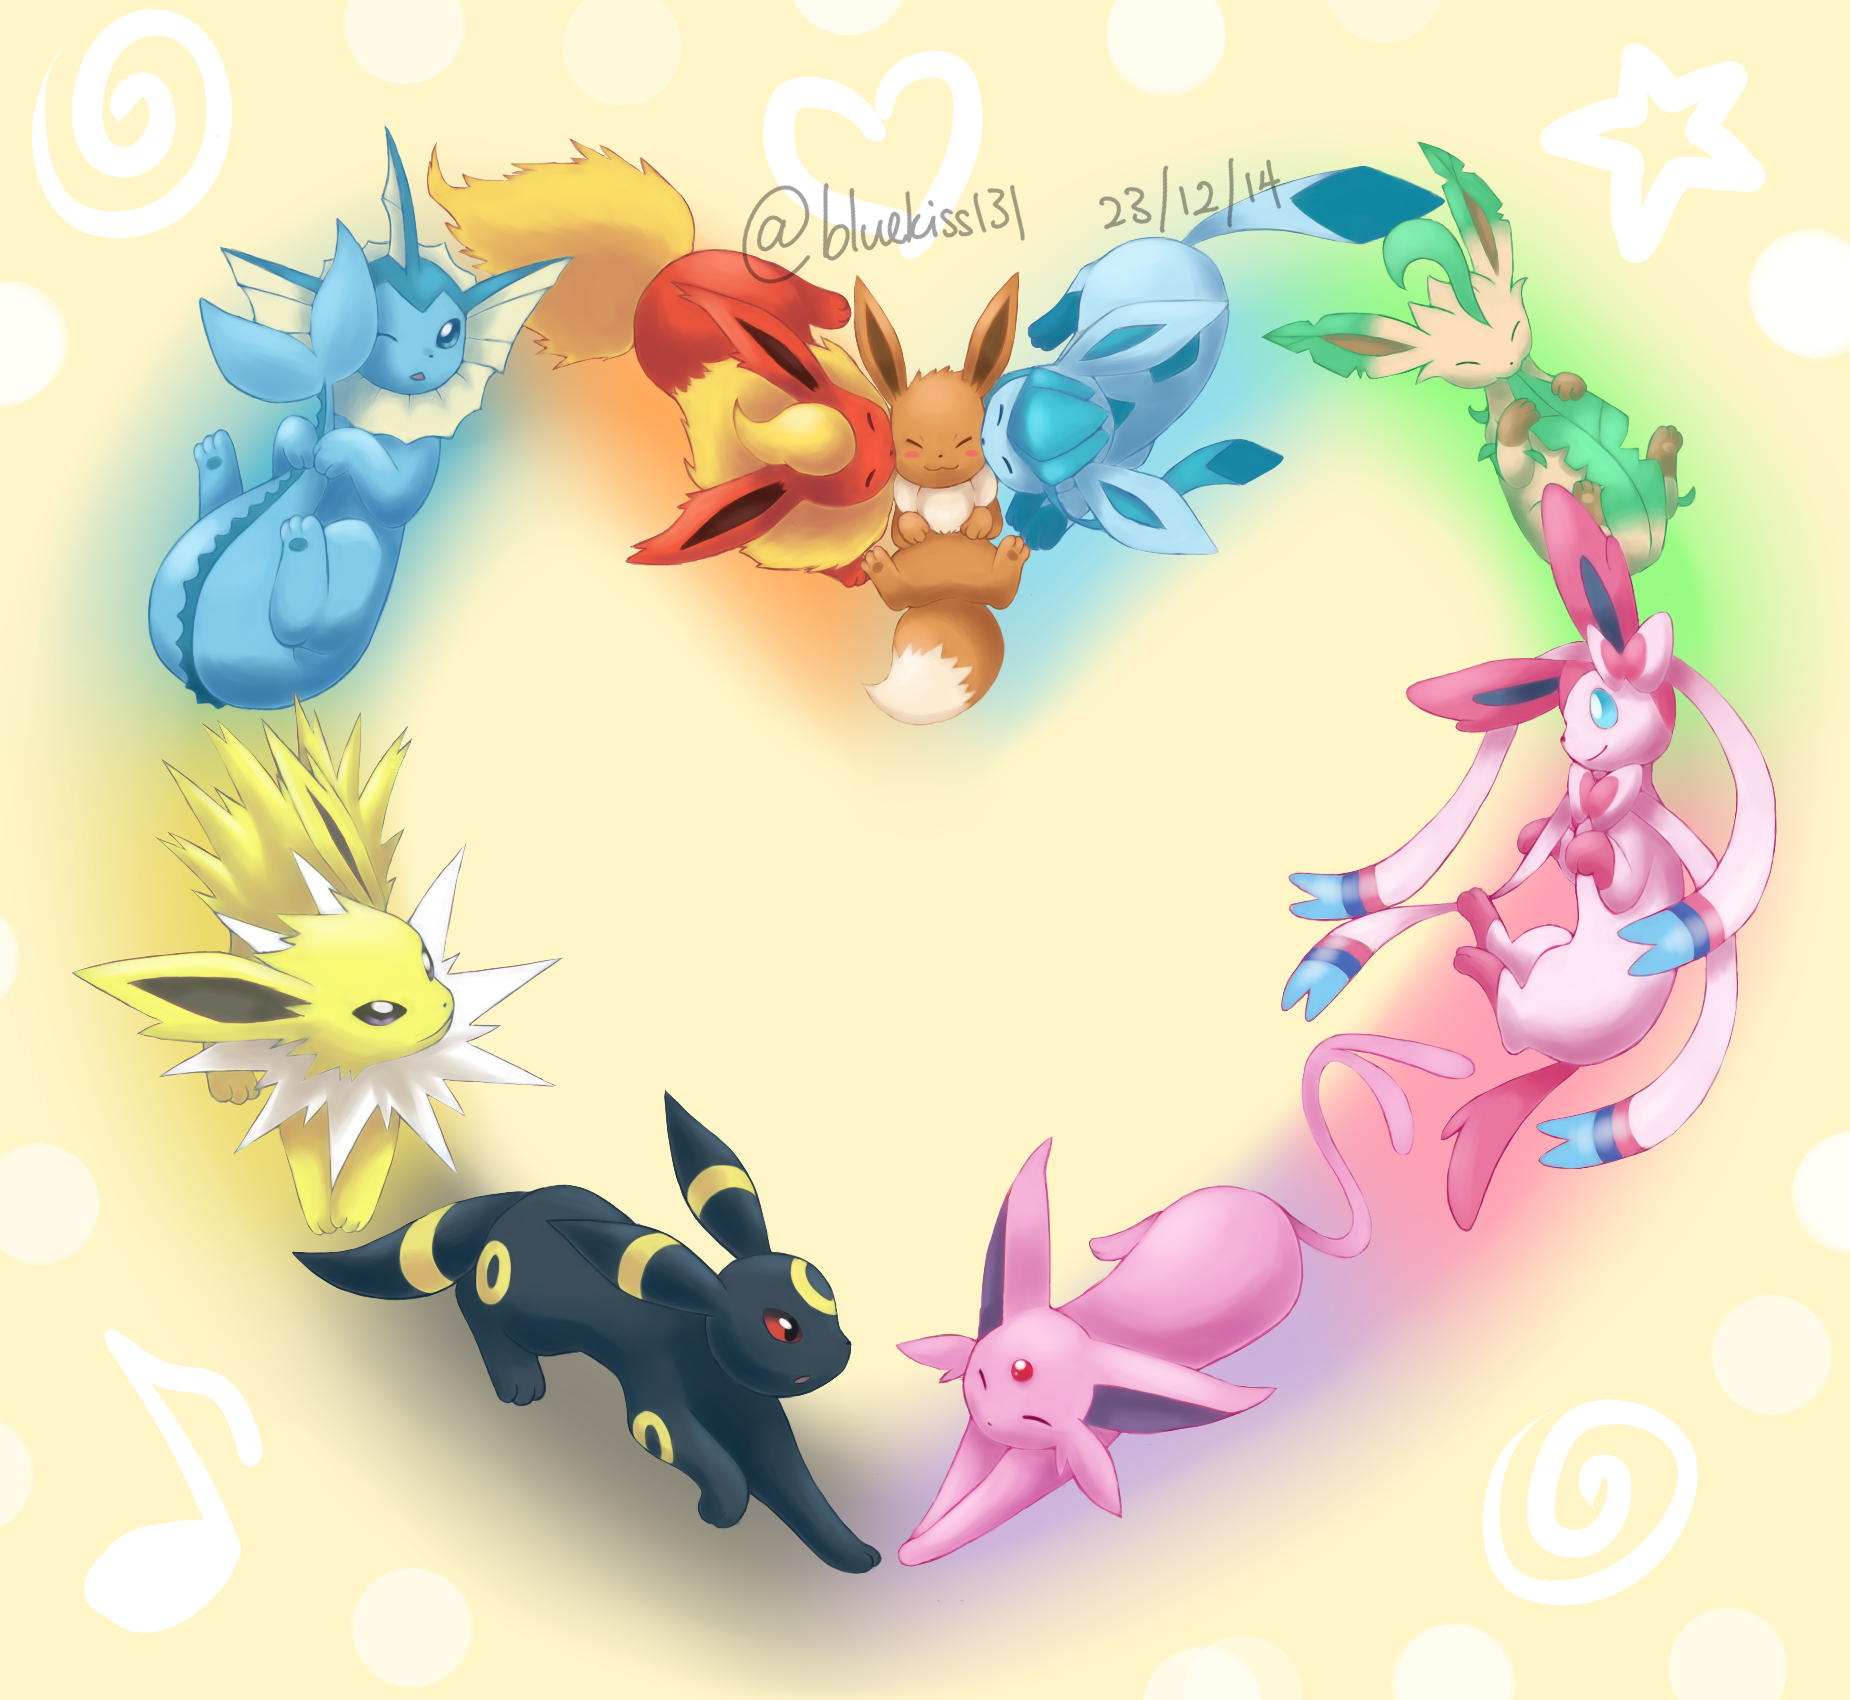 i_love_eevee_family_by_bluekiss131-d8awt4j.png